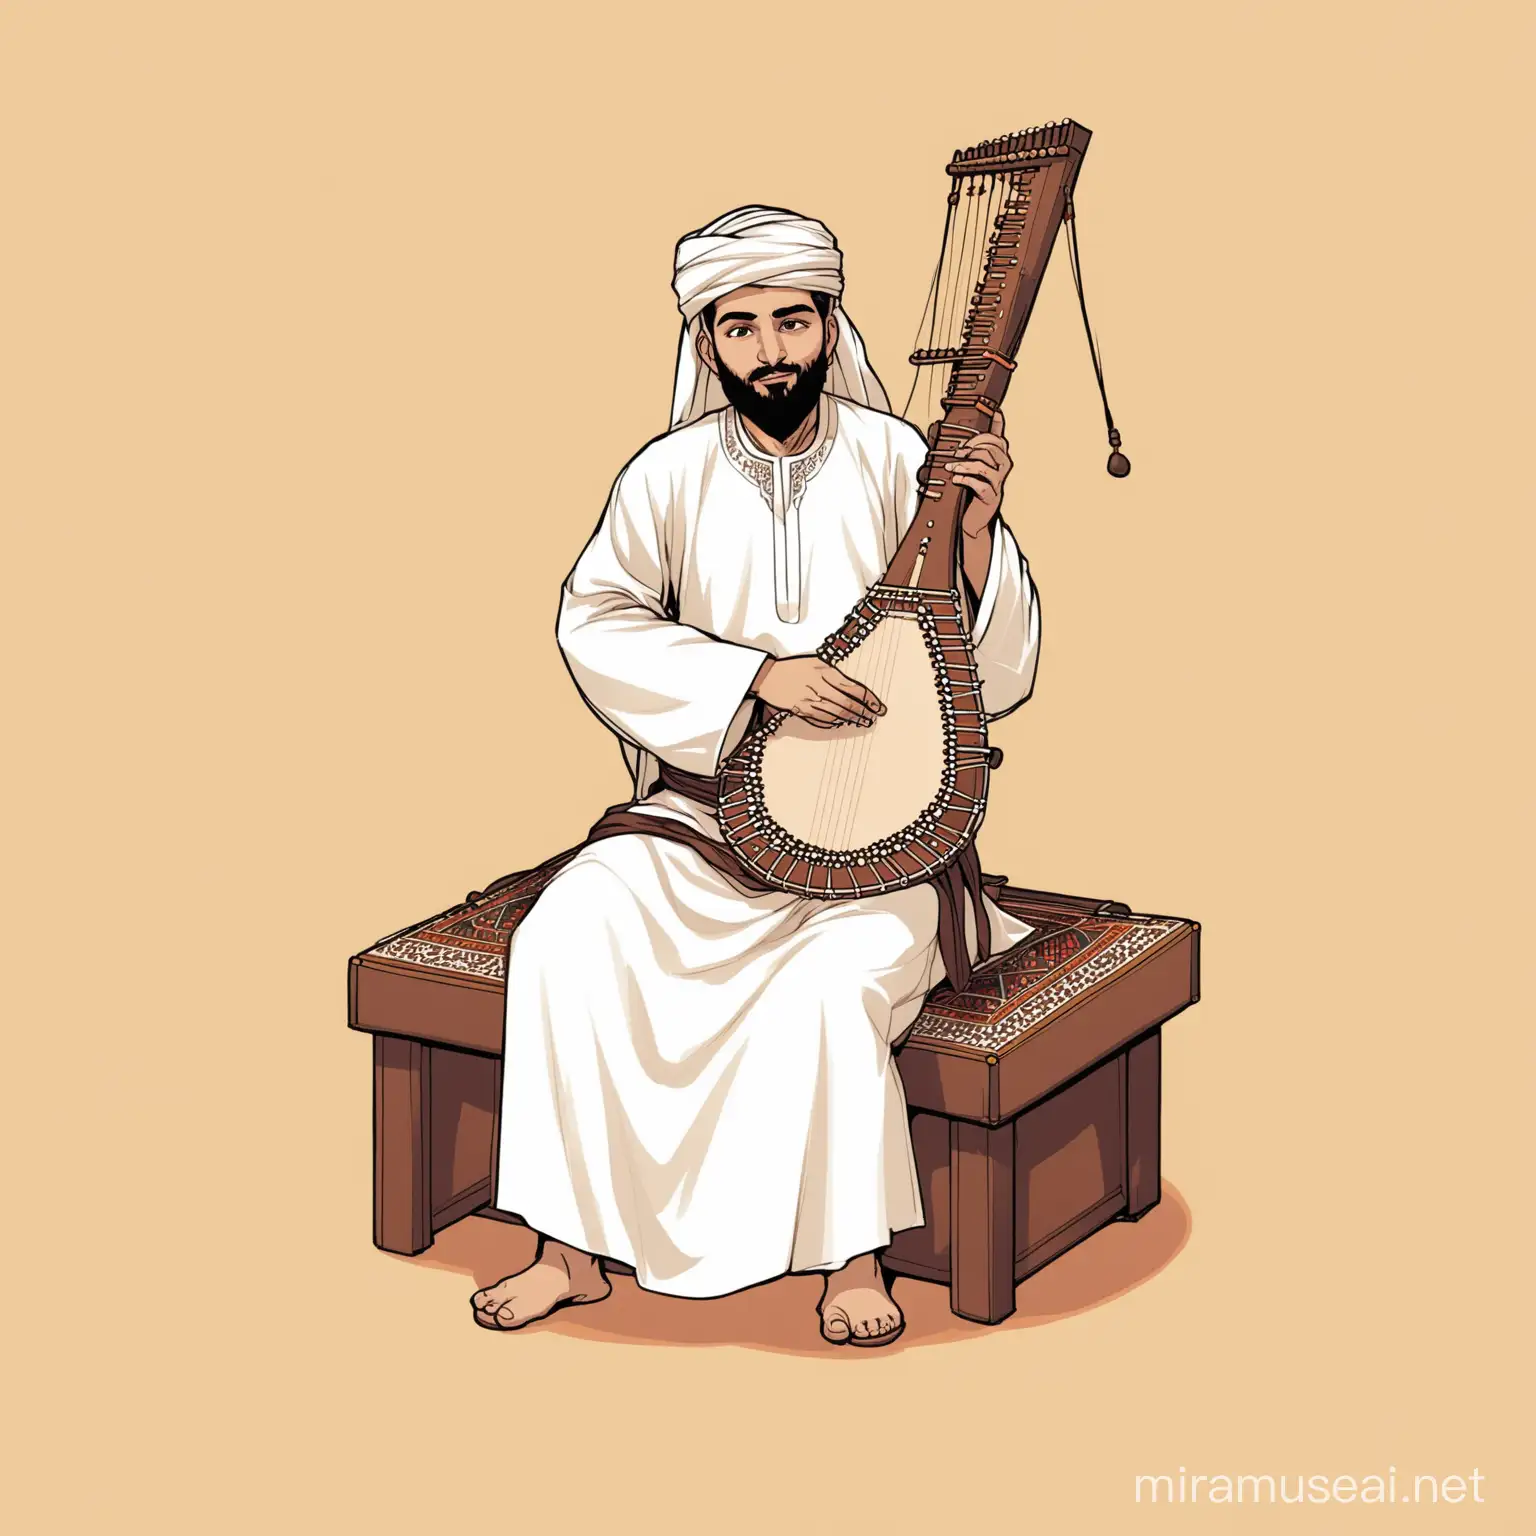 Cartoon Illustration of a Man Playing the Rebab Musical Instrument